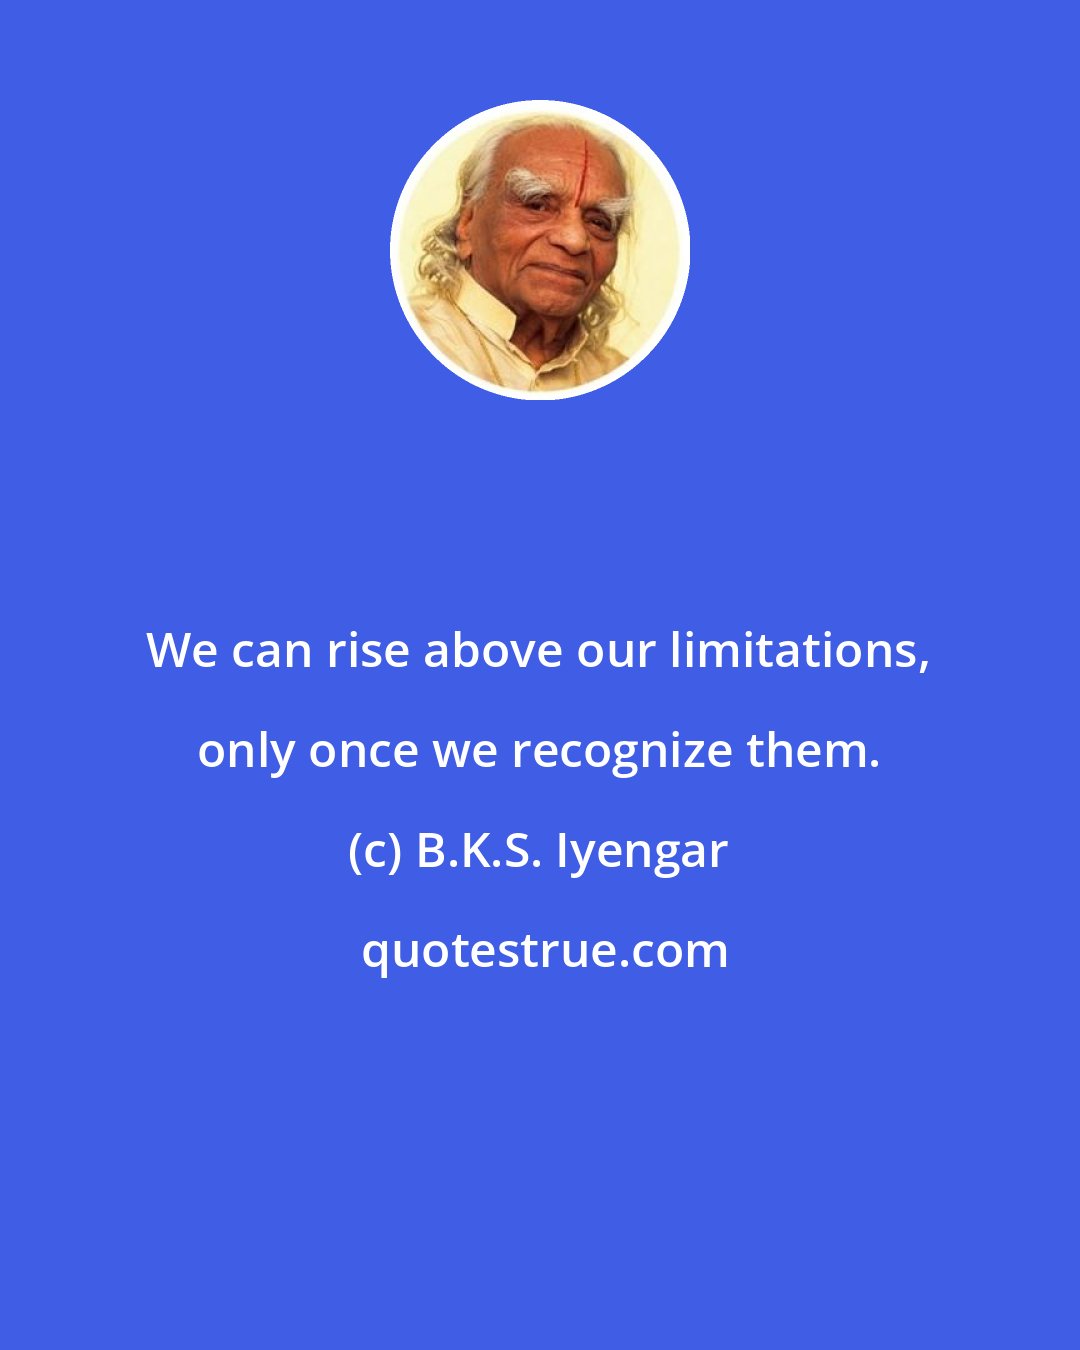 B.K.S. Iyengar: We can rise above our limitations, only once we recognize them.